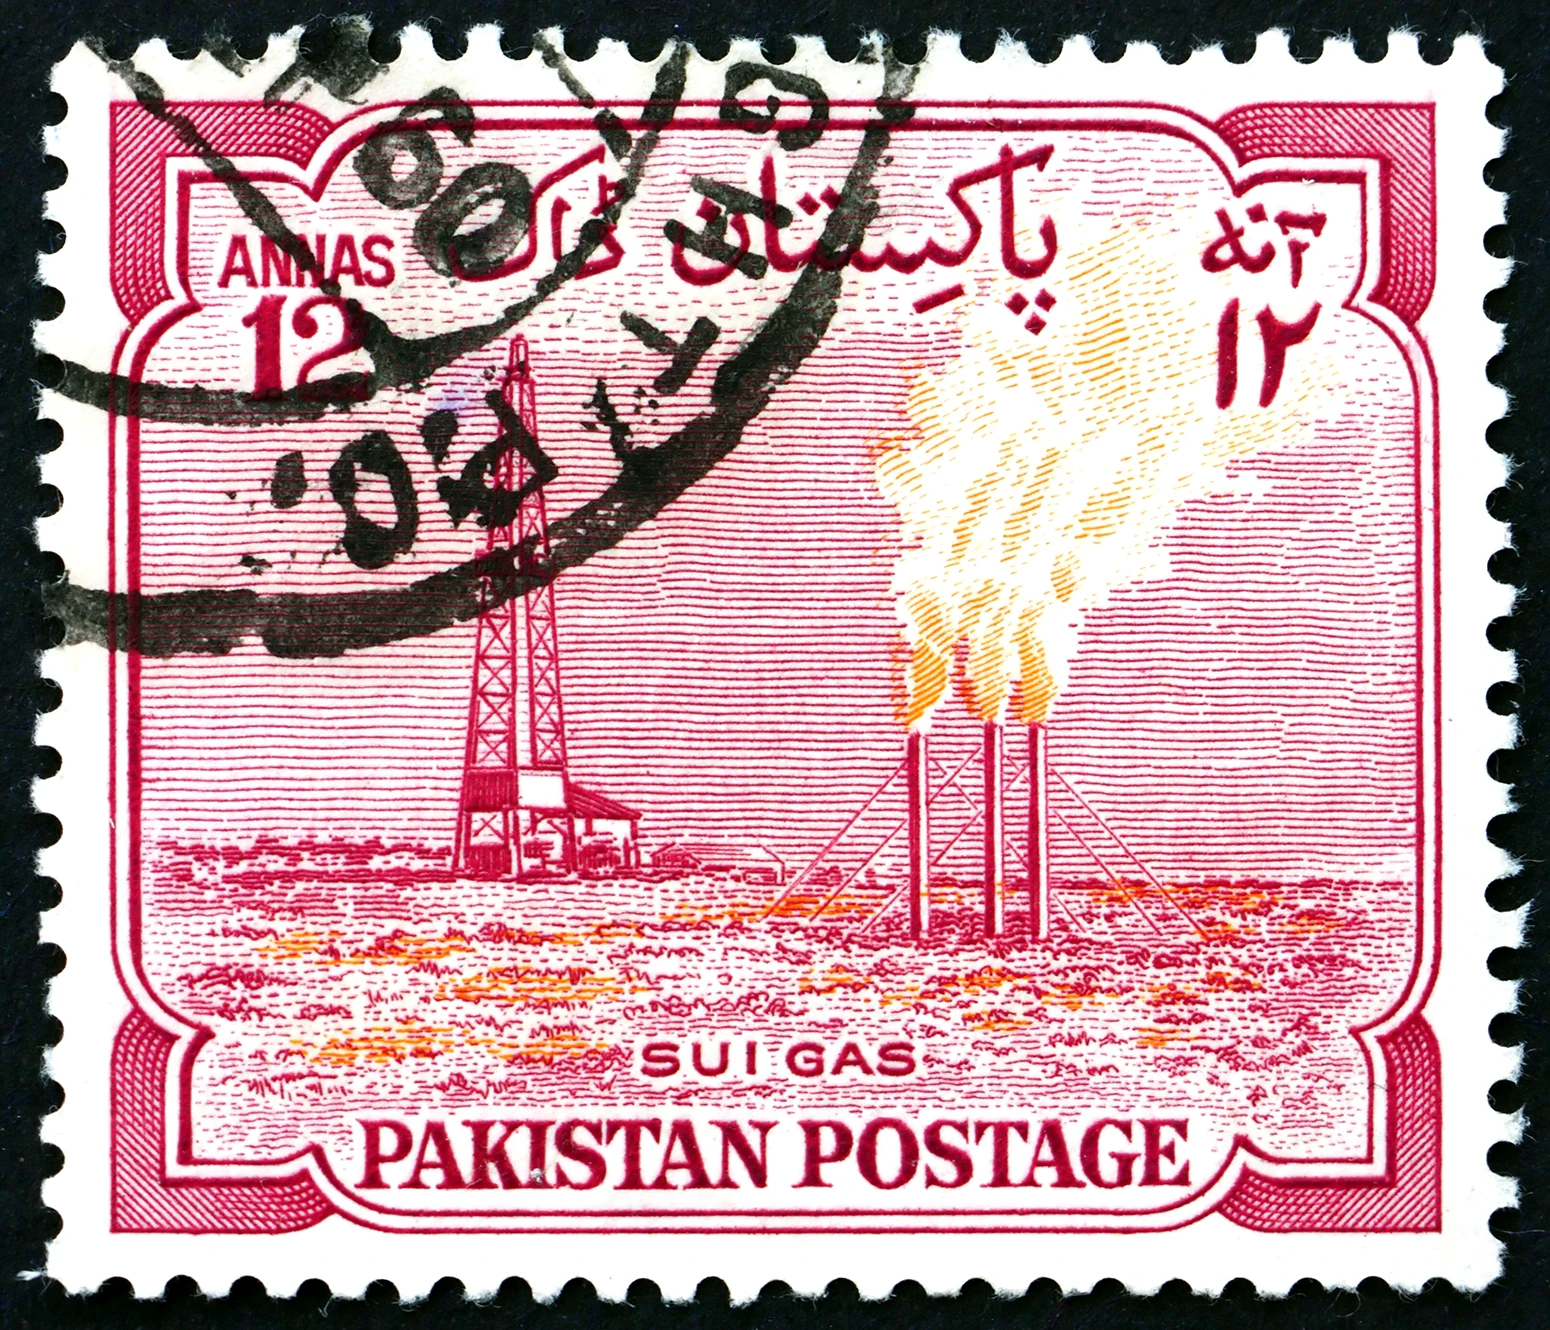 A Pakistani stamp showing the Sui gas plant, circa 1955.